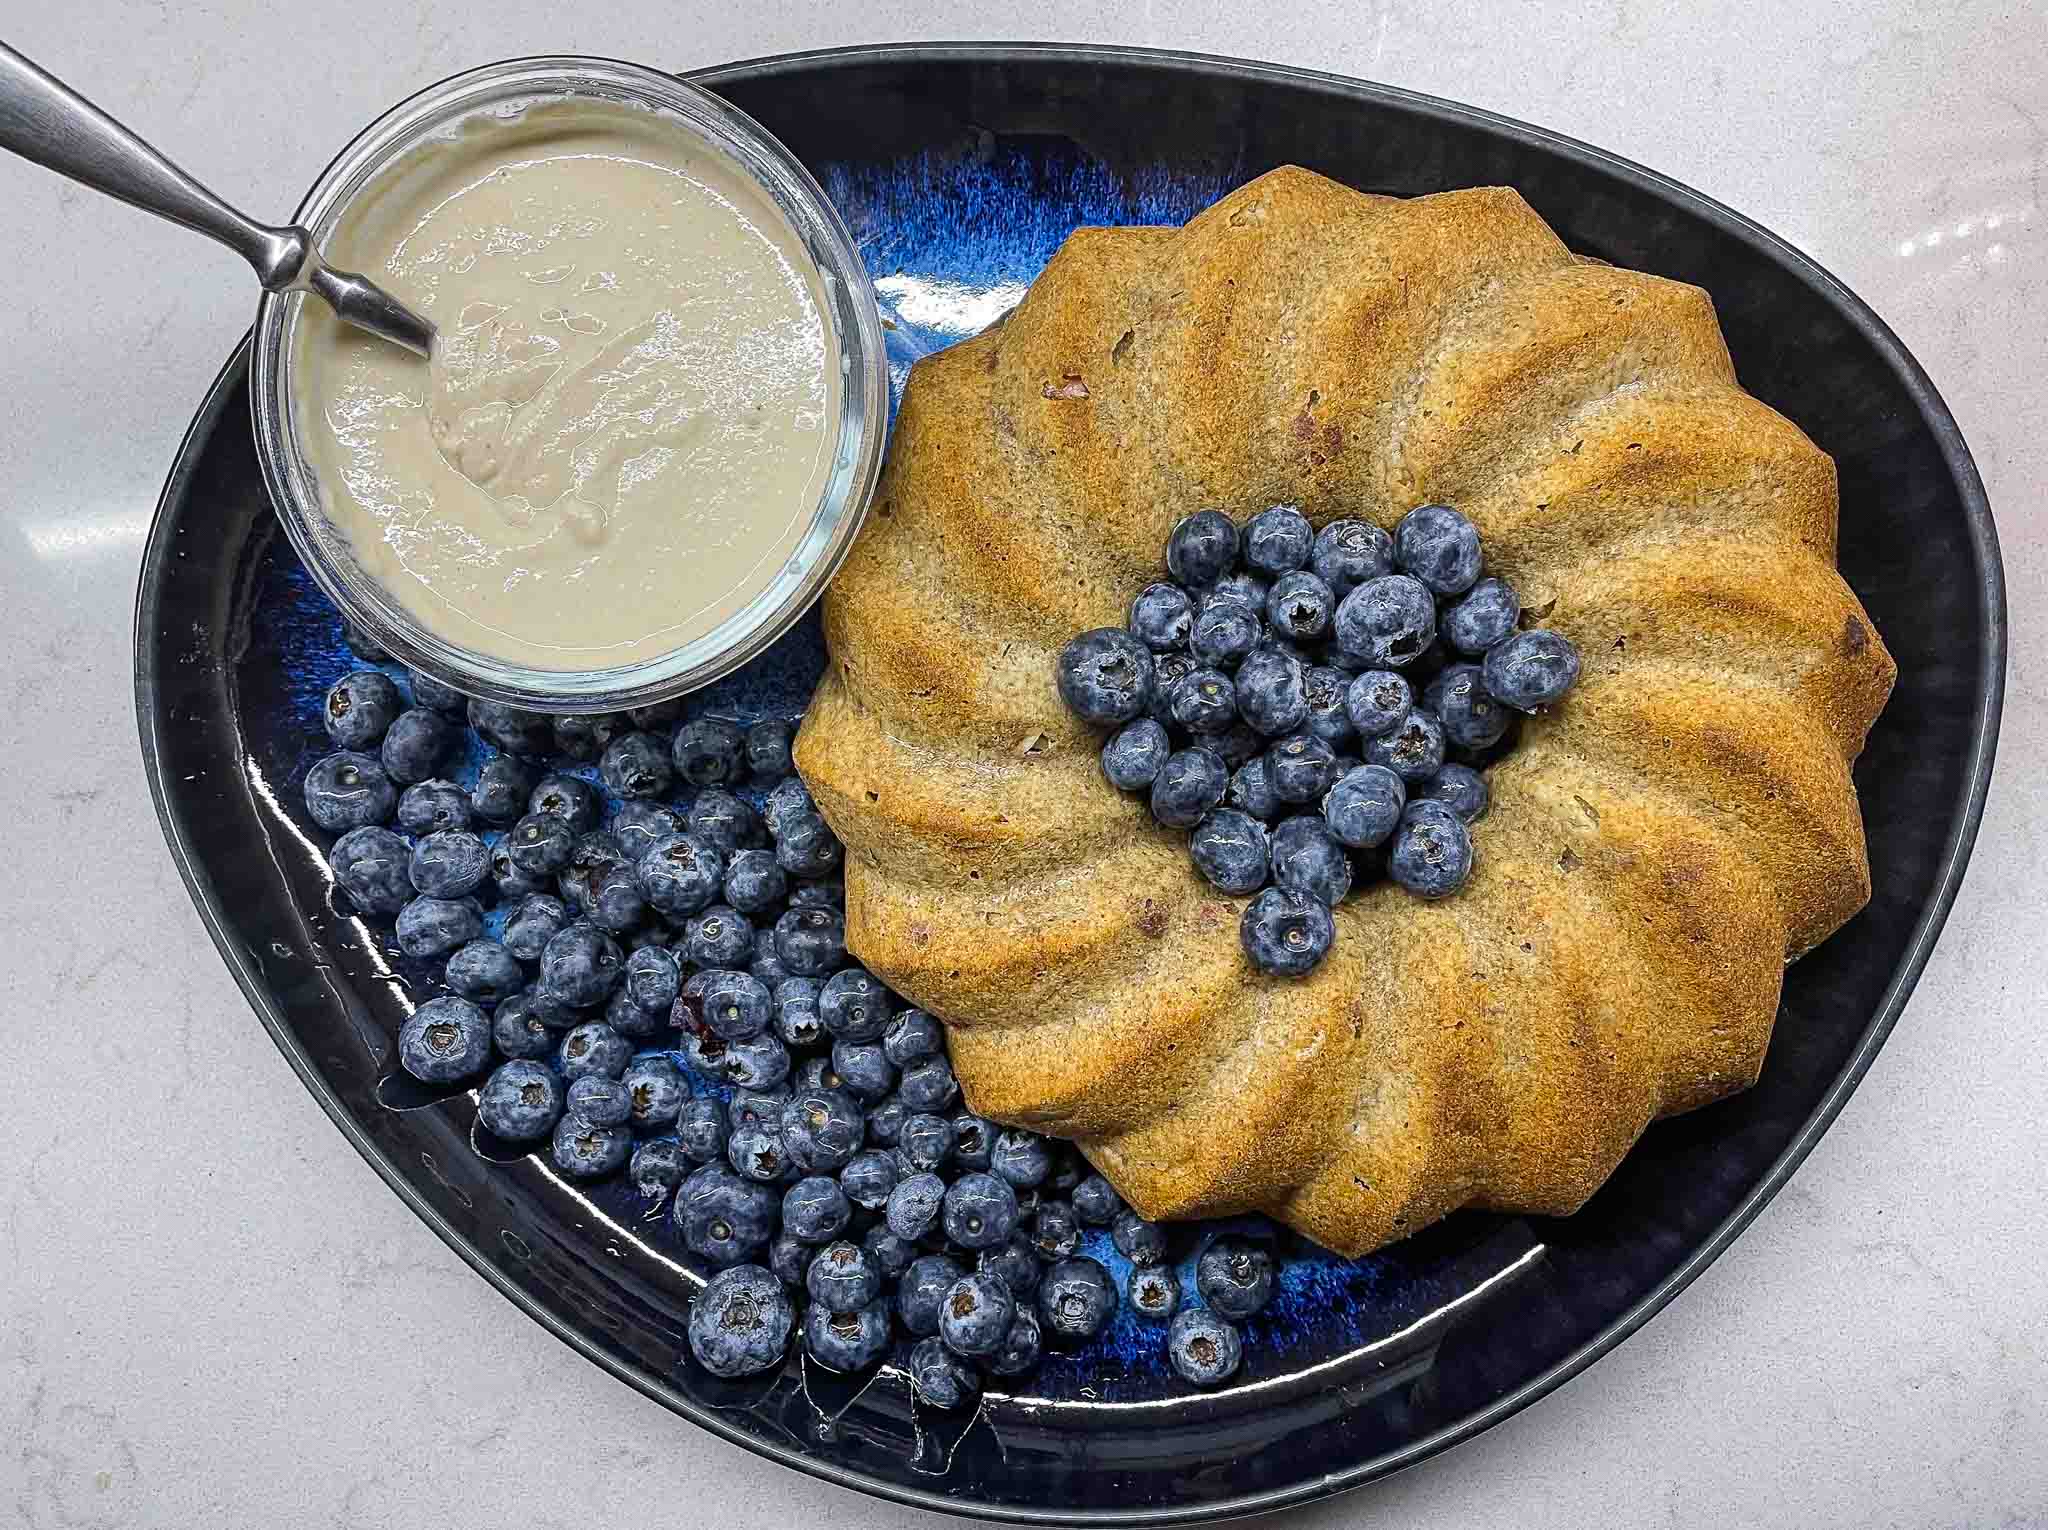 alt="a round pear cake served with the pear cream and blueberries."